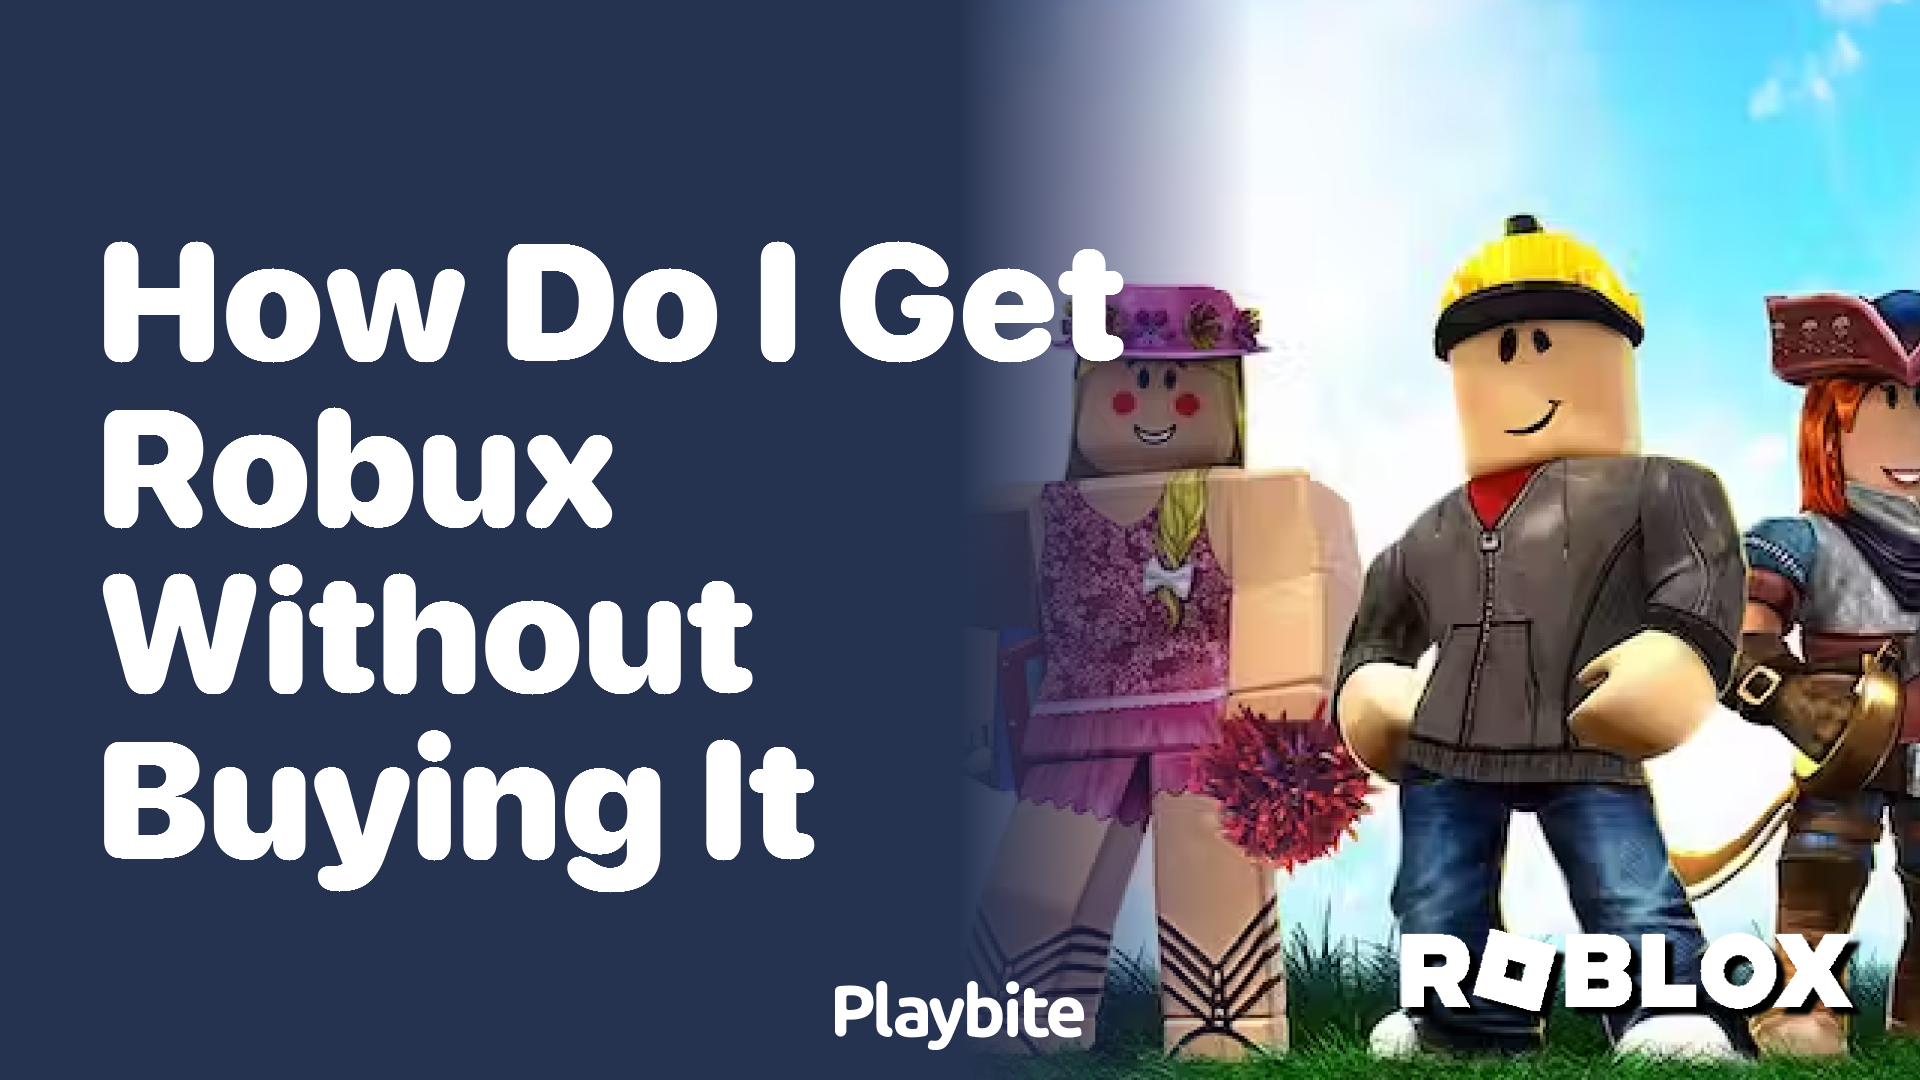 How Do I Get Robux Without Buying It?